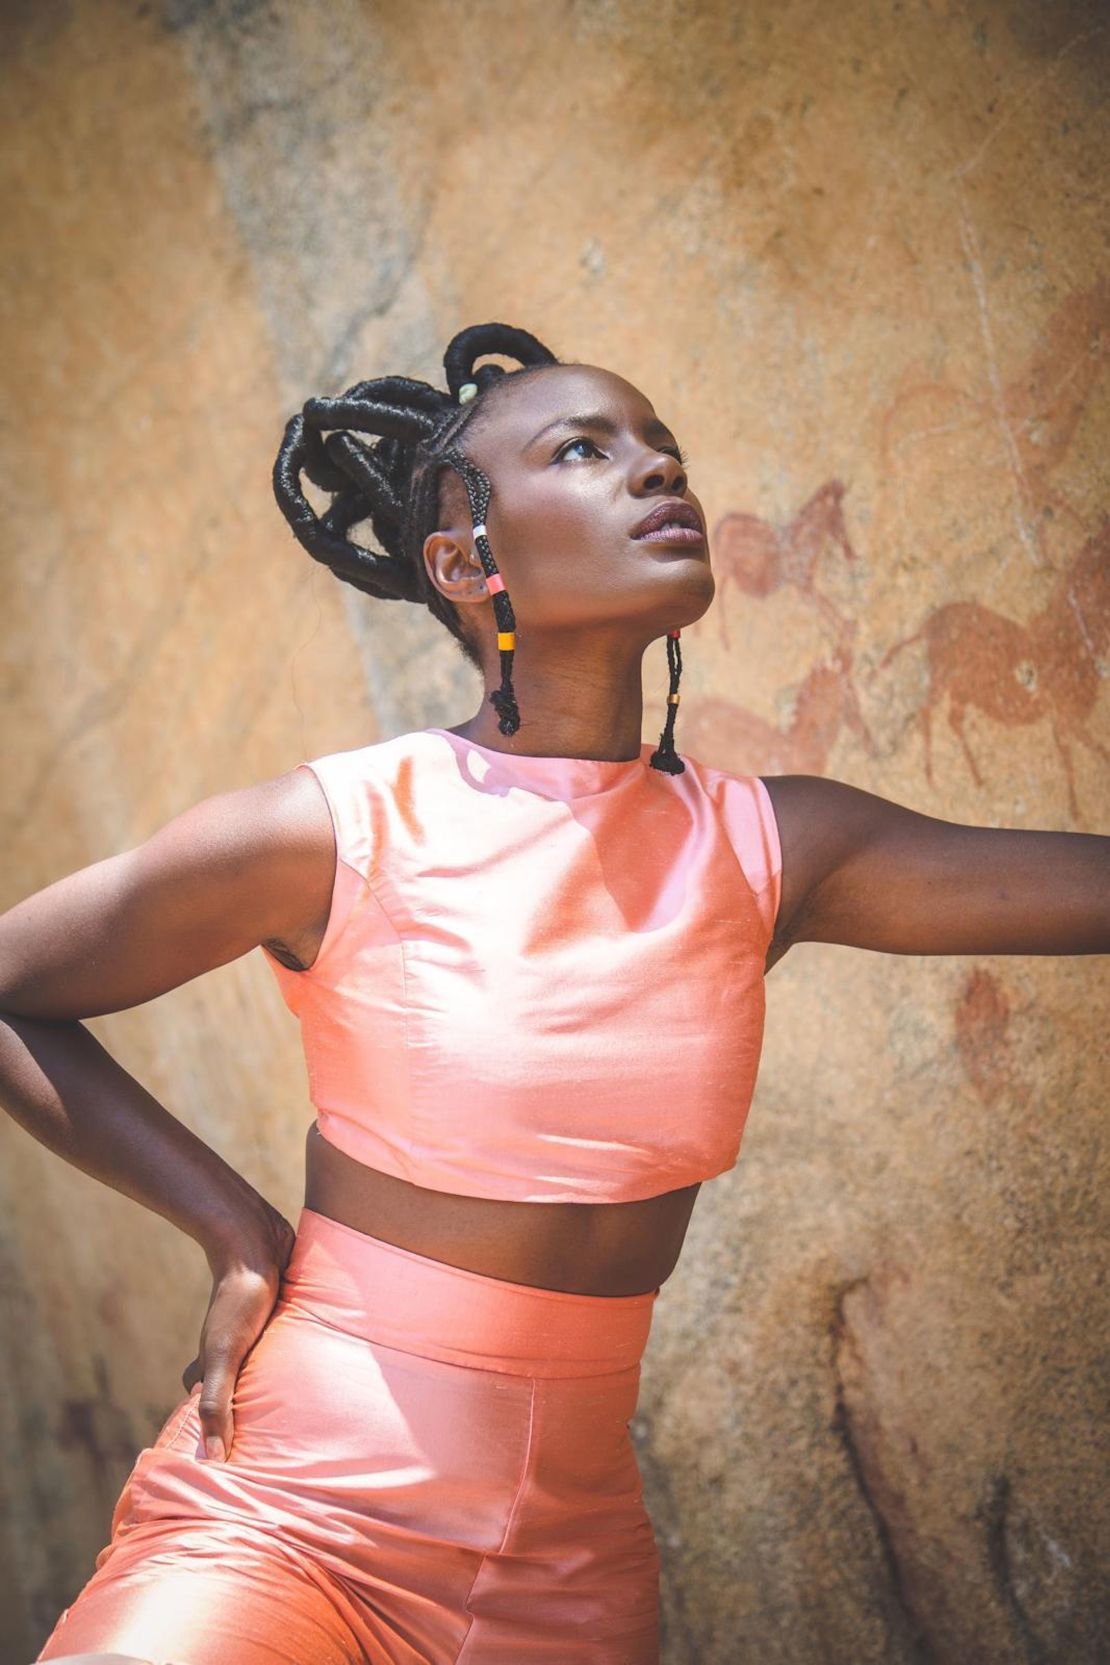 "There's British Shingai who grew up in South London with all the energy of the concrete jungle," Shingai said. "But I also feel like an old soul because of the Zimbabwean and Bantu heritage I have."